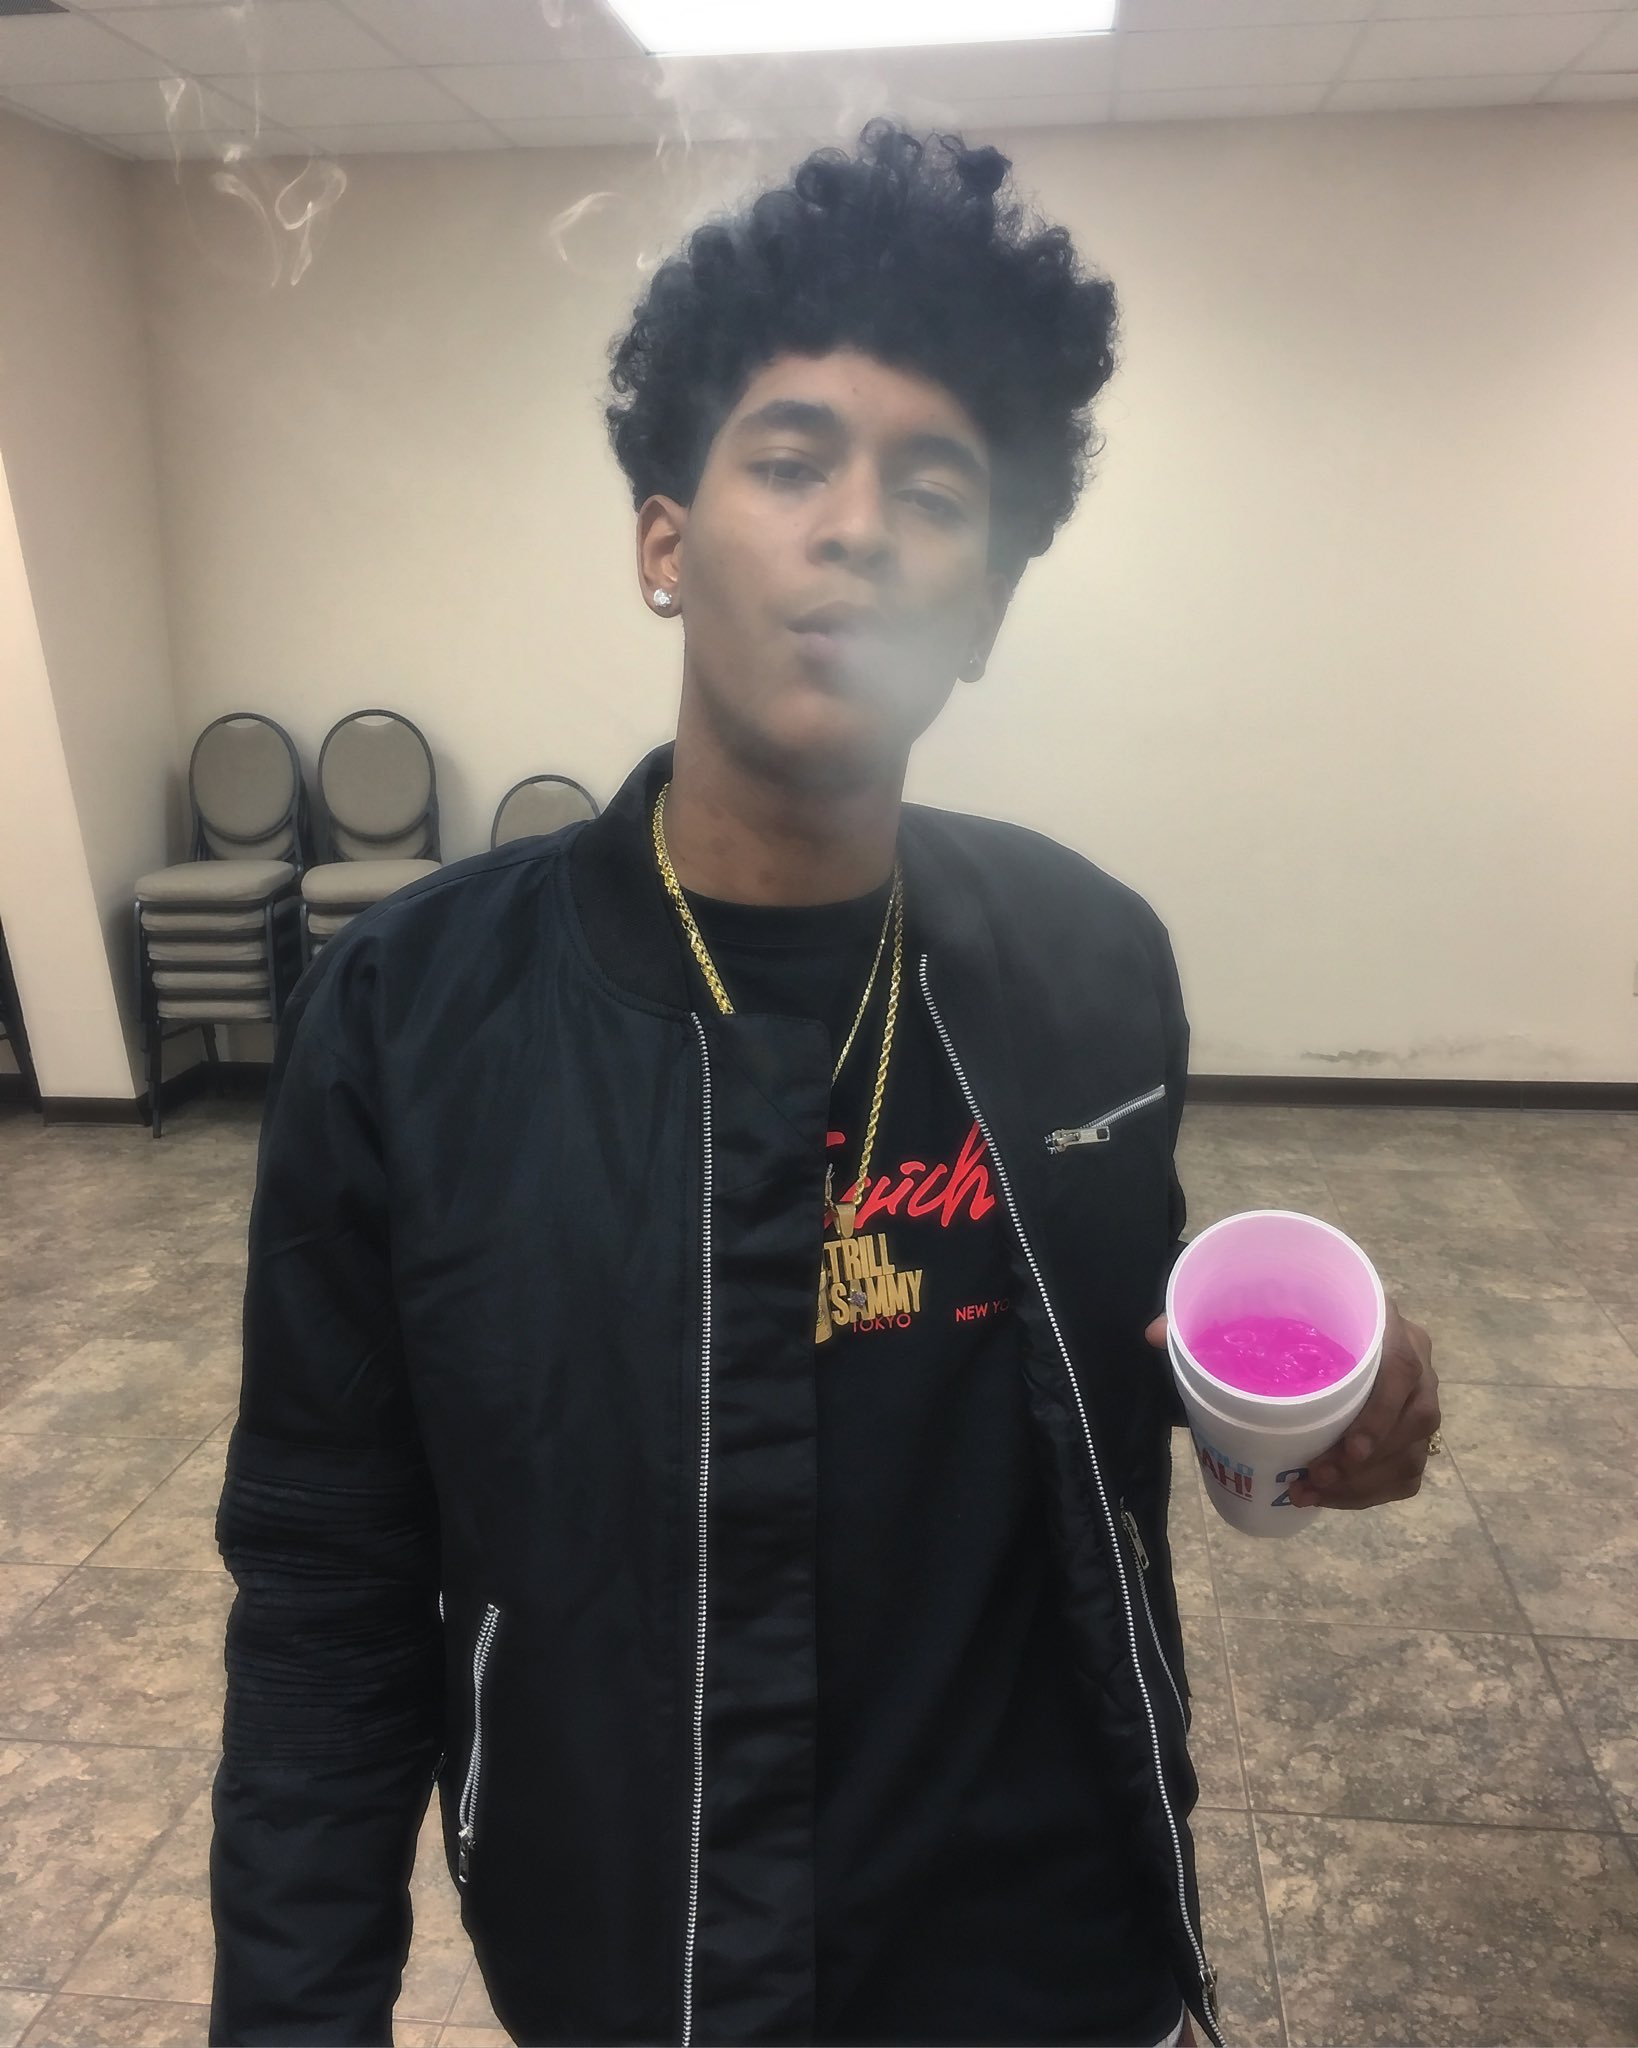 Trill Sammy Wallpapers